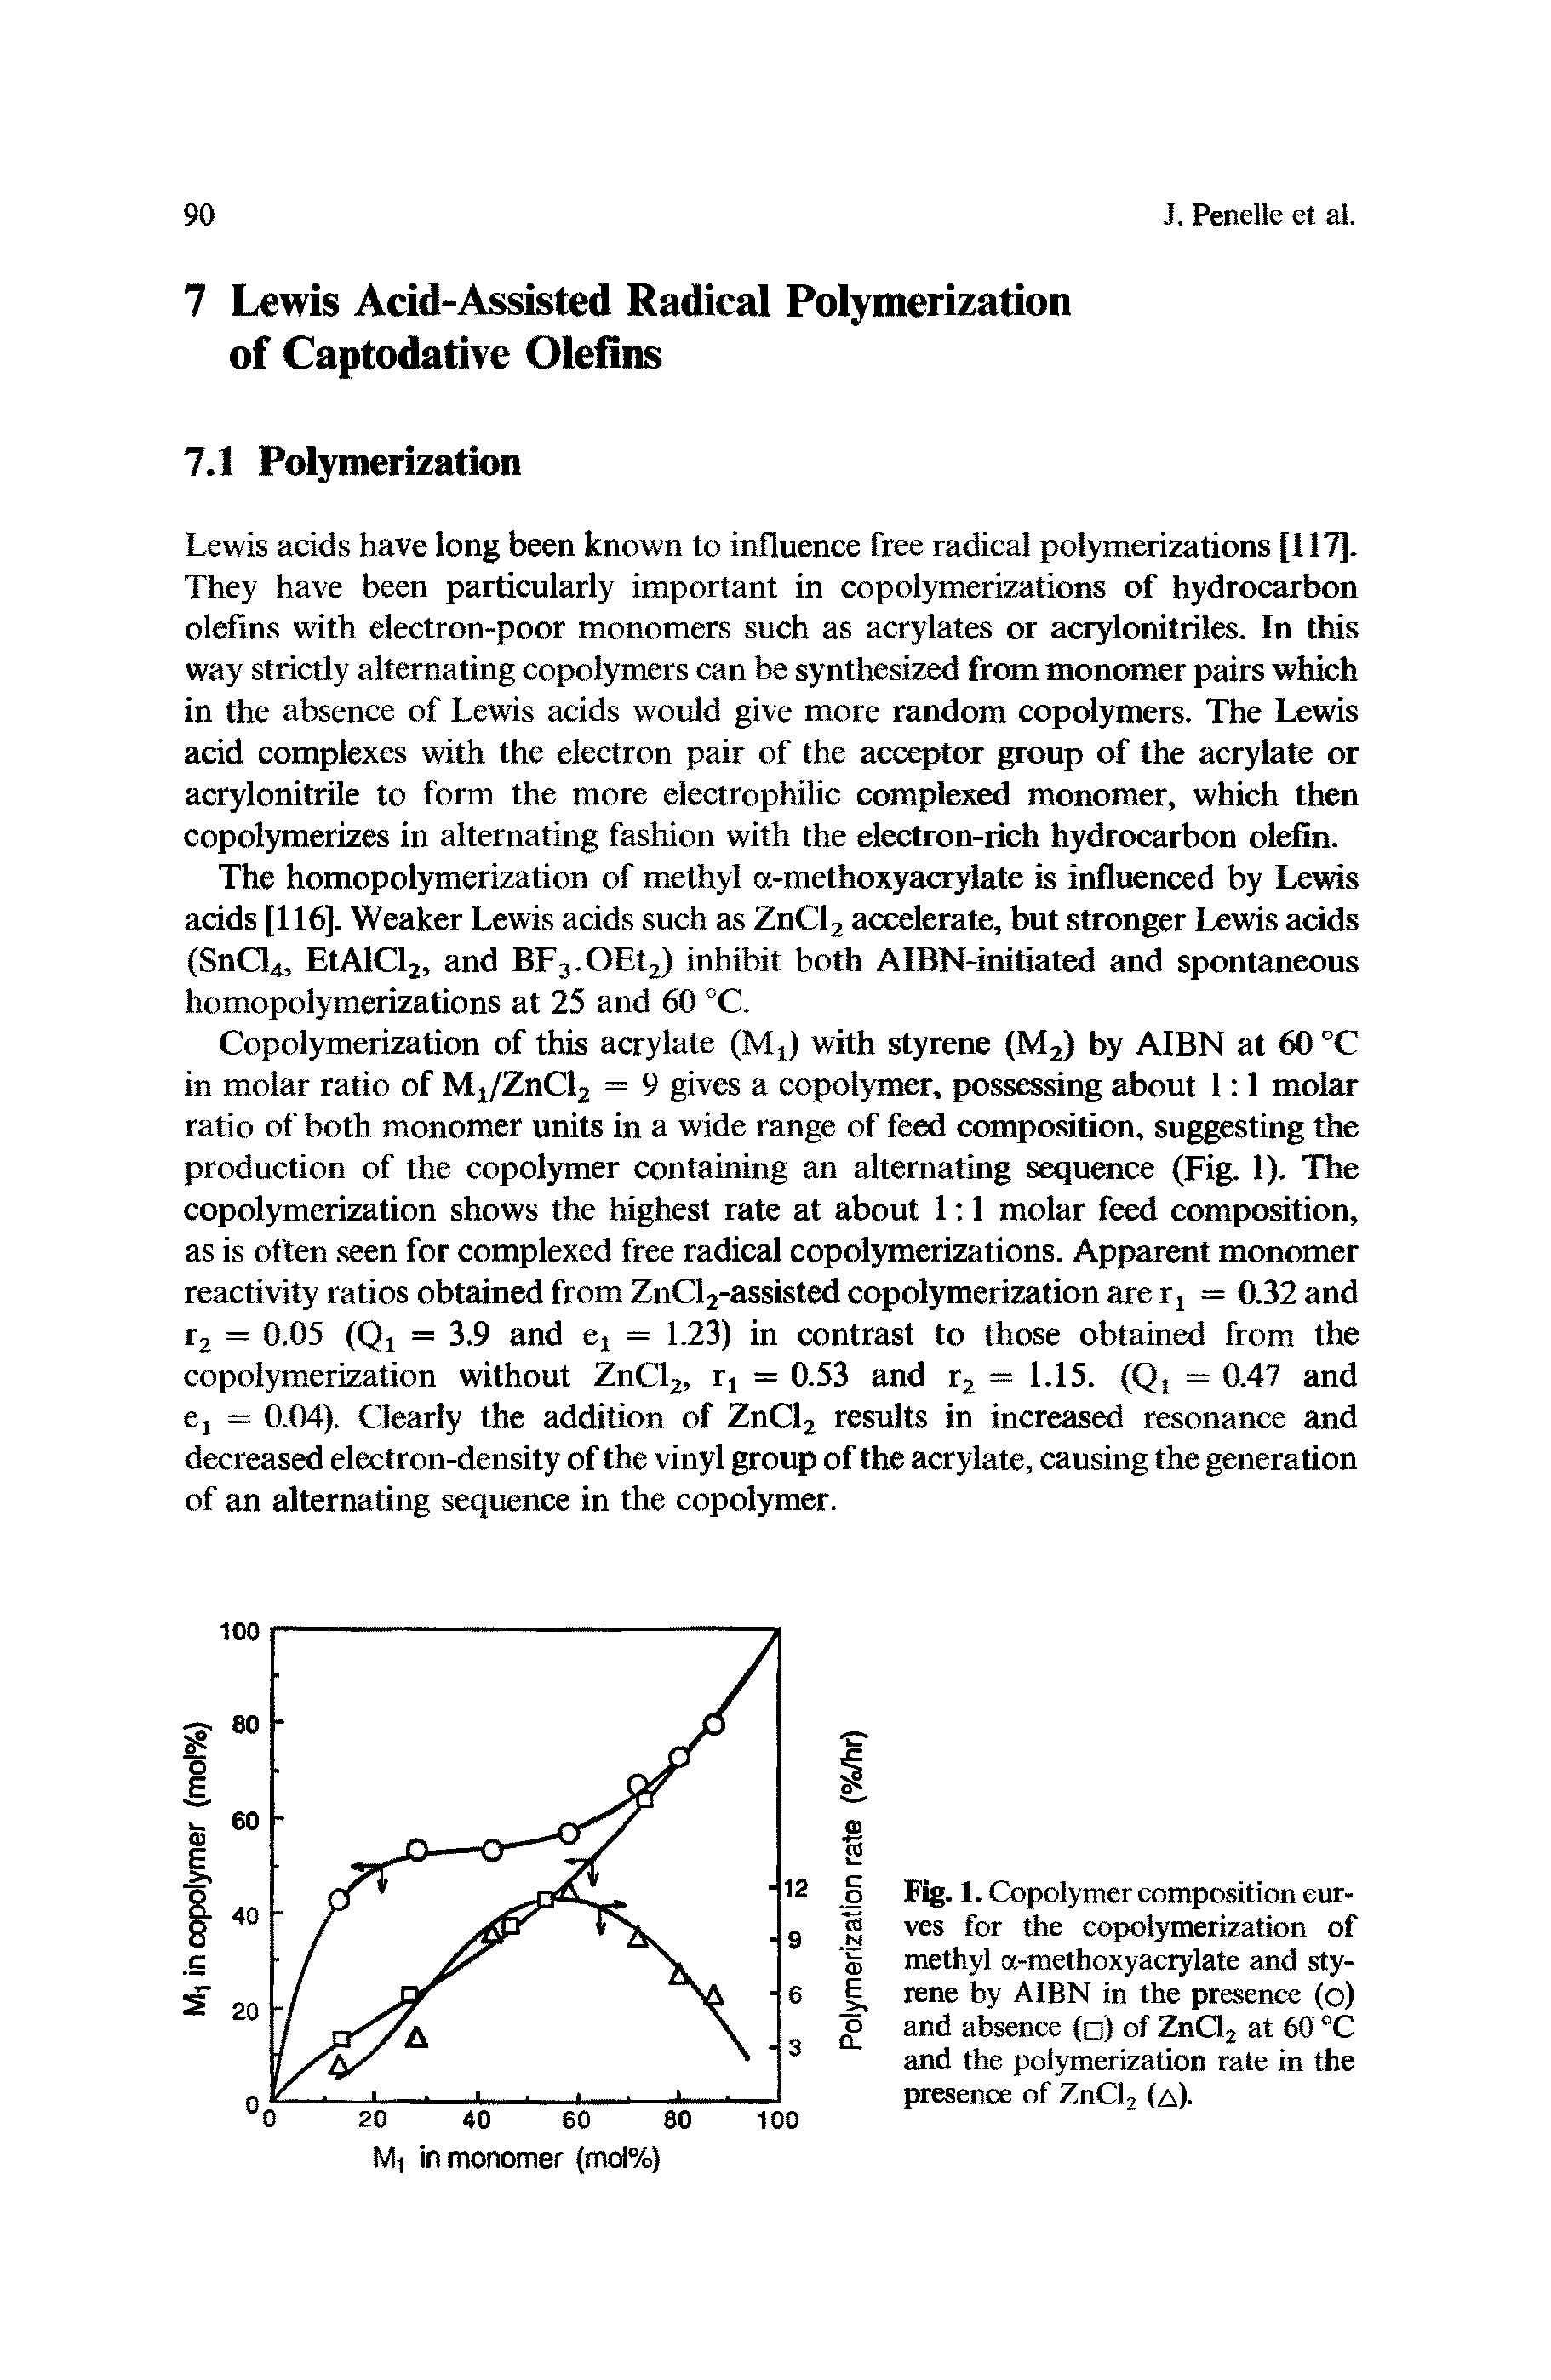 Fig. 1. Copolymer composition curves for the copolymerization of methyl a-methoxyacrylate and styrene by AIBN in the presence (o) and absence ( ) of ZnCl2 at 60 °C and the polymerization rate in the presence of ZnCl2 (a).